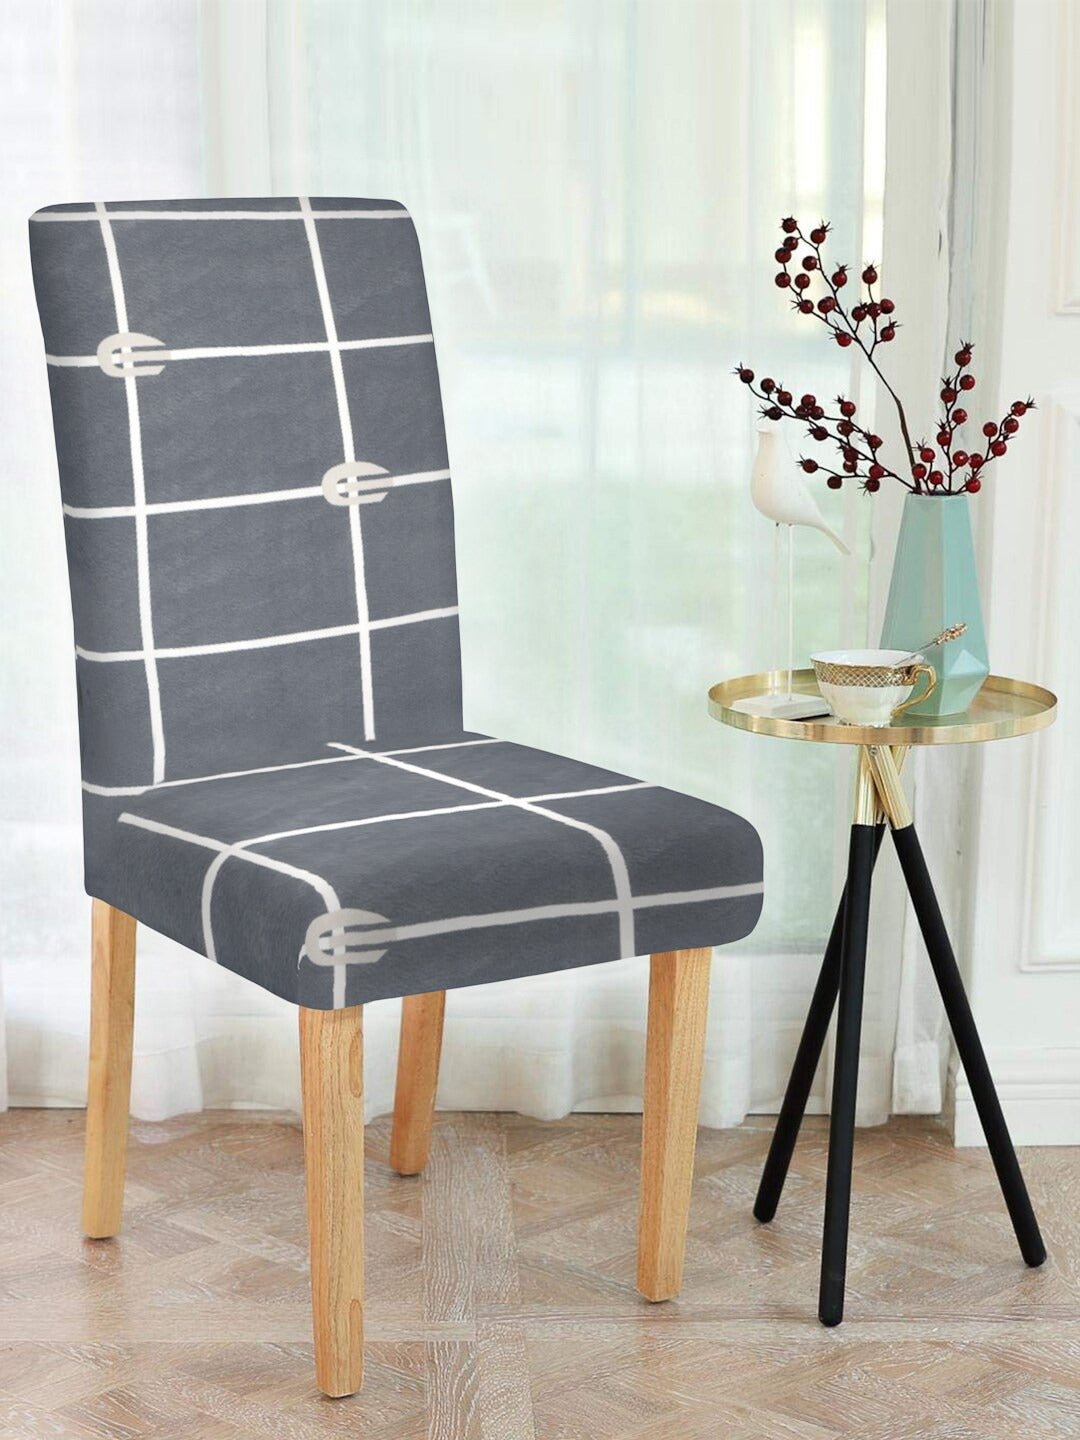  Dining roon Chair Covers -  magic universal chair cover Grey & White Checked Design - DivineTrendz, you can choose dining room chair covers that will add an elegant touch to your home and make your dining room look sophisticated and stylish.